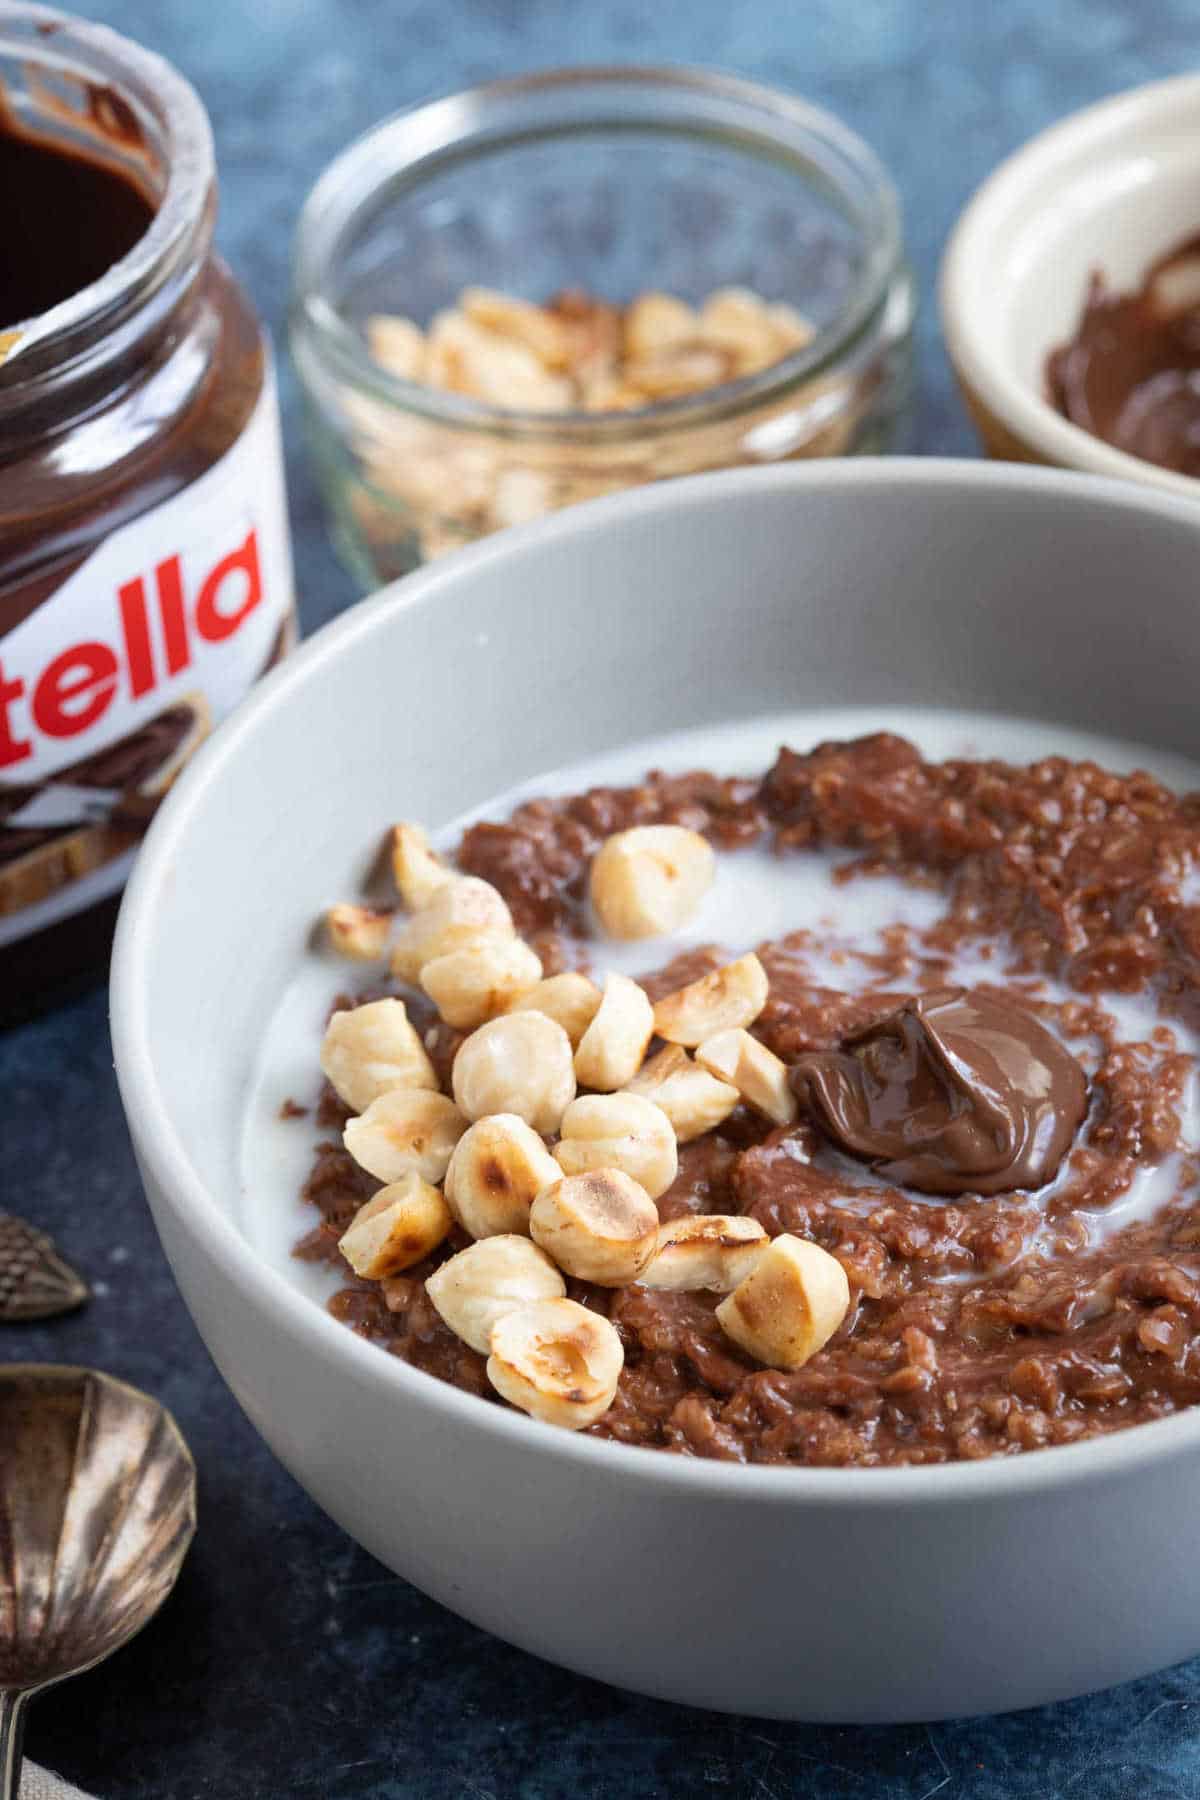 A bowl of Nutella porridge with a jar of Nutella in the background.